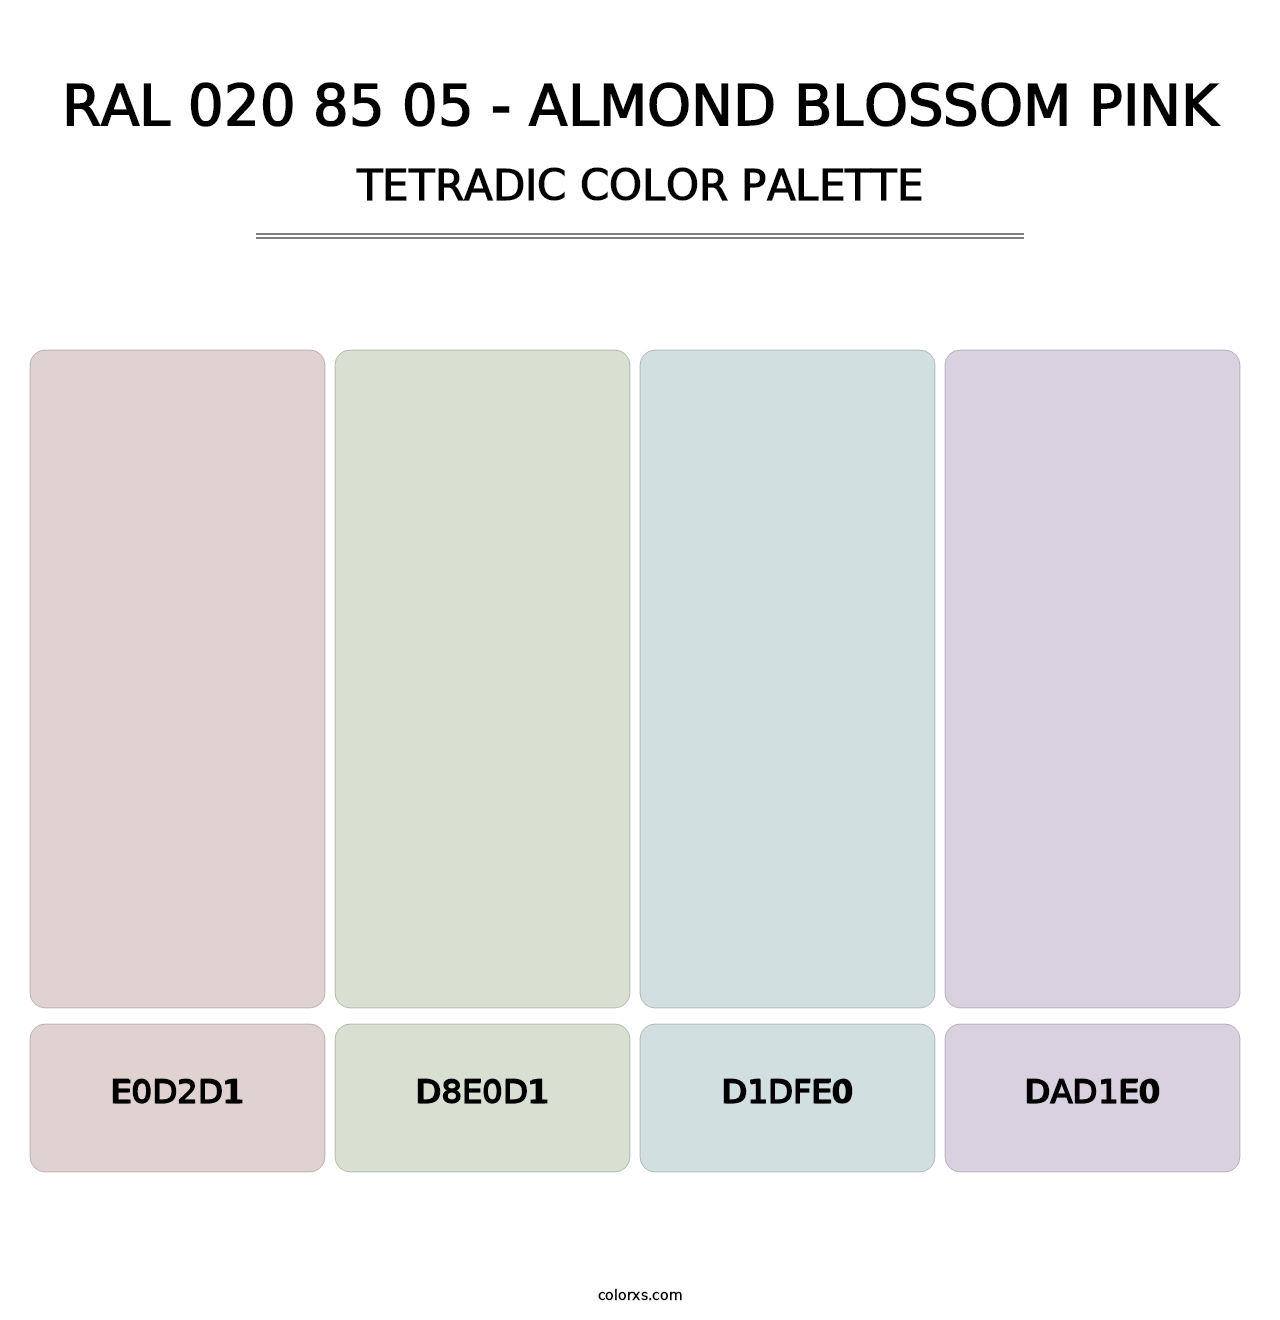 RAL 020 85 05 - Almond Blossom Pink - Tetradic Color Palette